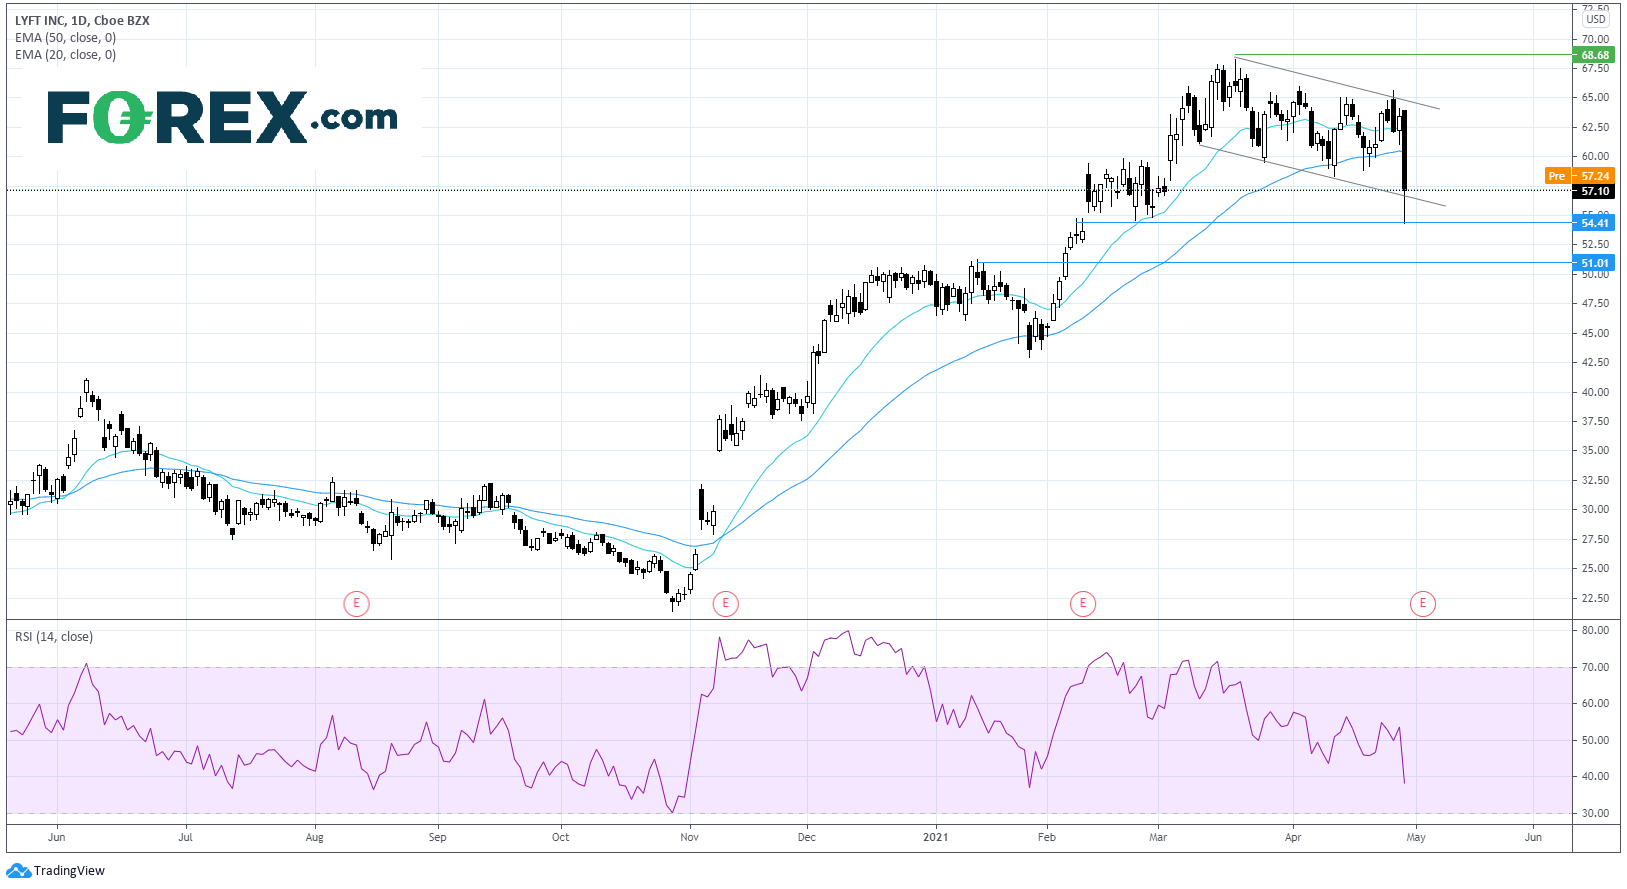 Chart analysis shows Lyft Q1 Earnings Preview. Published in April 2021 by FOREX.com